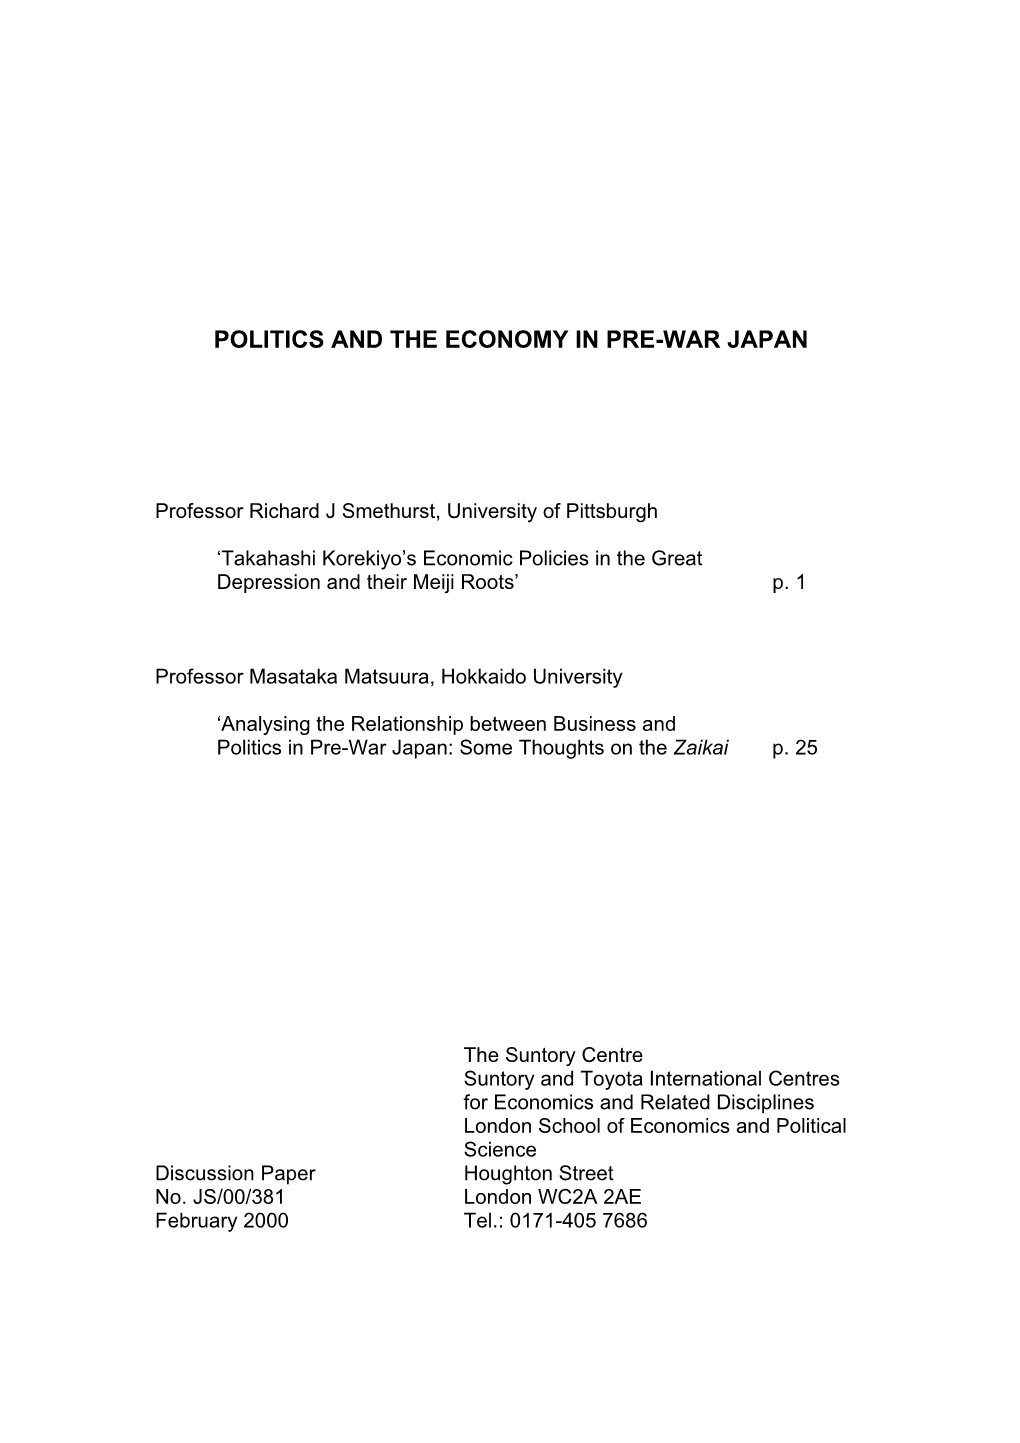 Politics and the Economy in Pre-War Japan